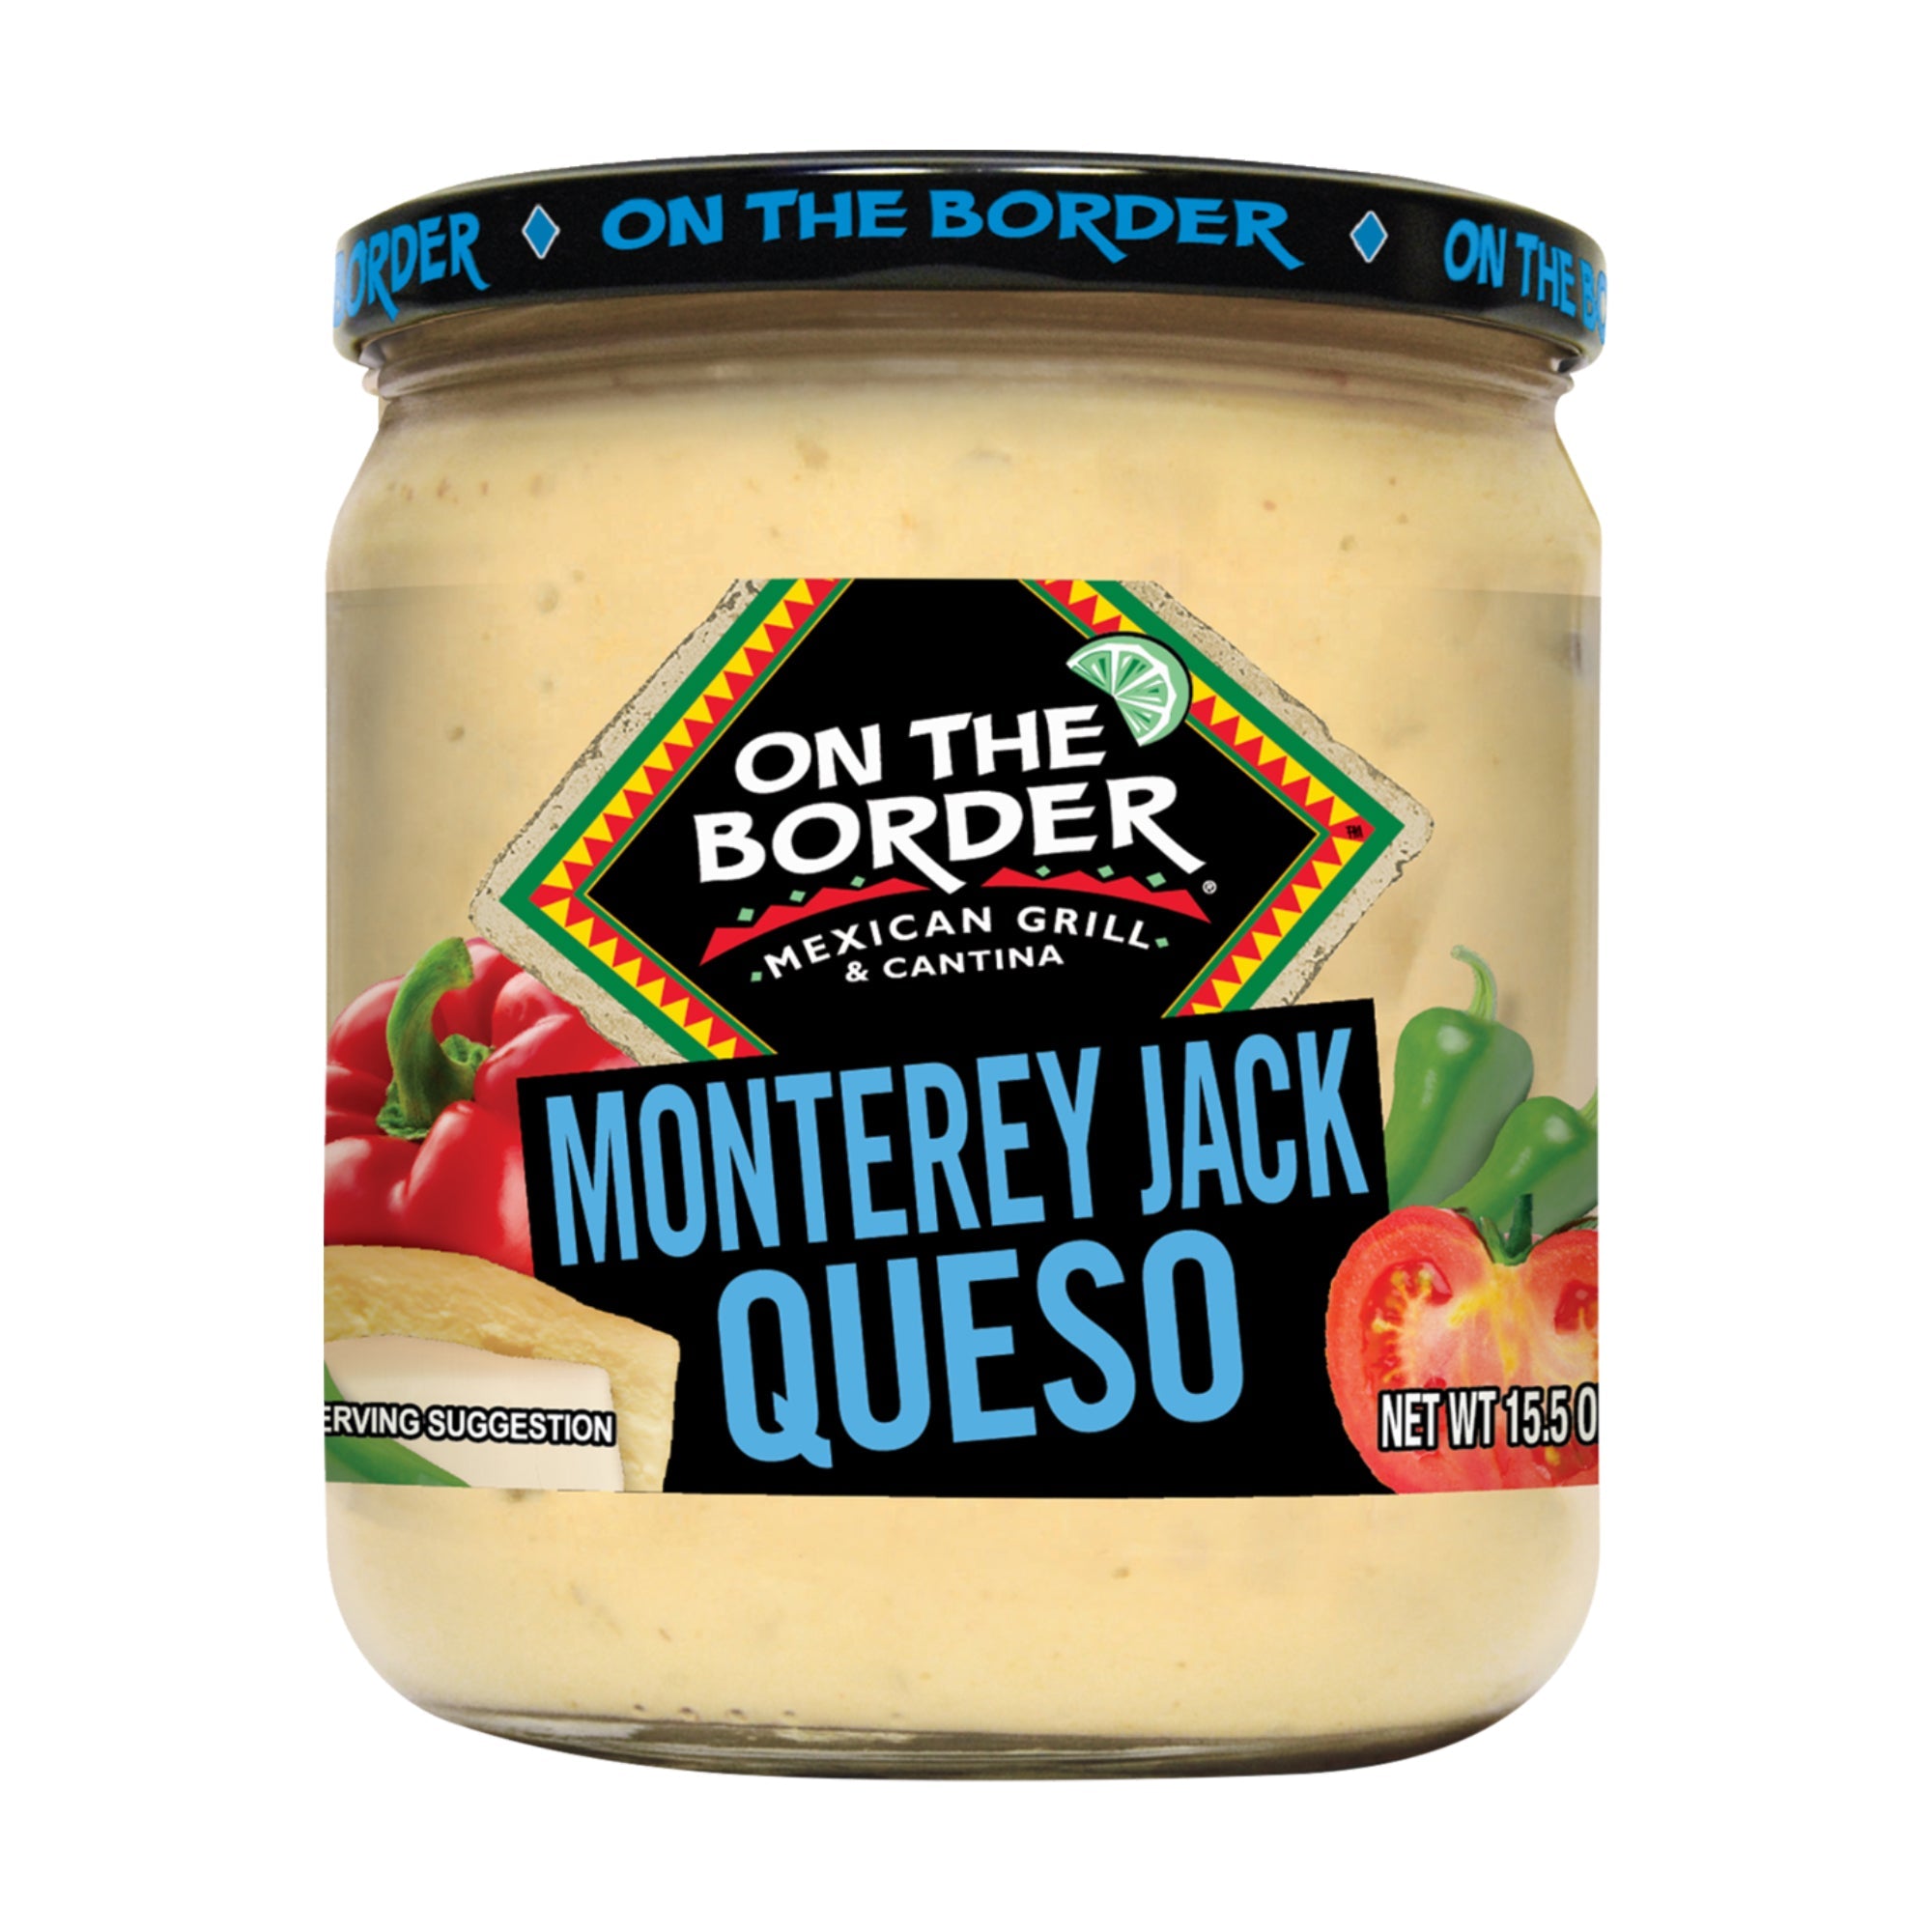 On The Border Queso Montery Jack 15.50 oz. Jar Dips & Salsa On The Border 